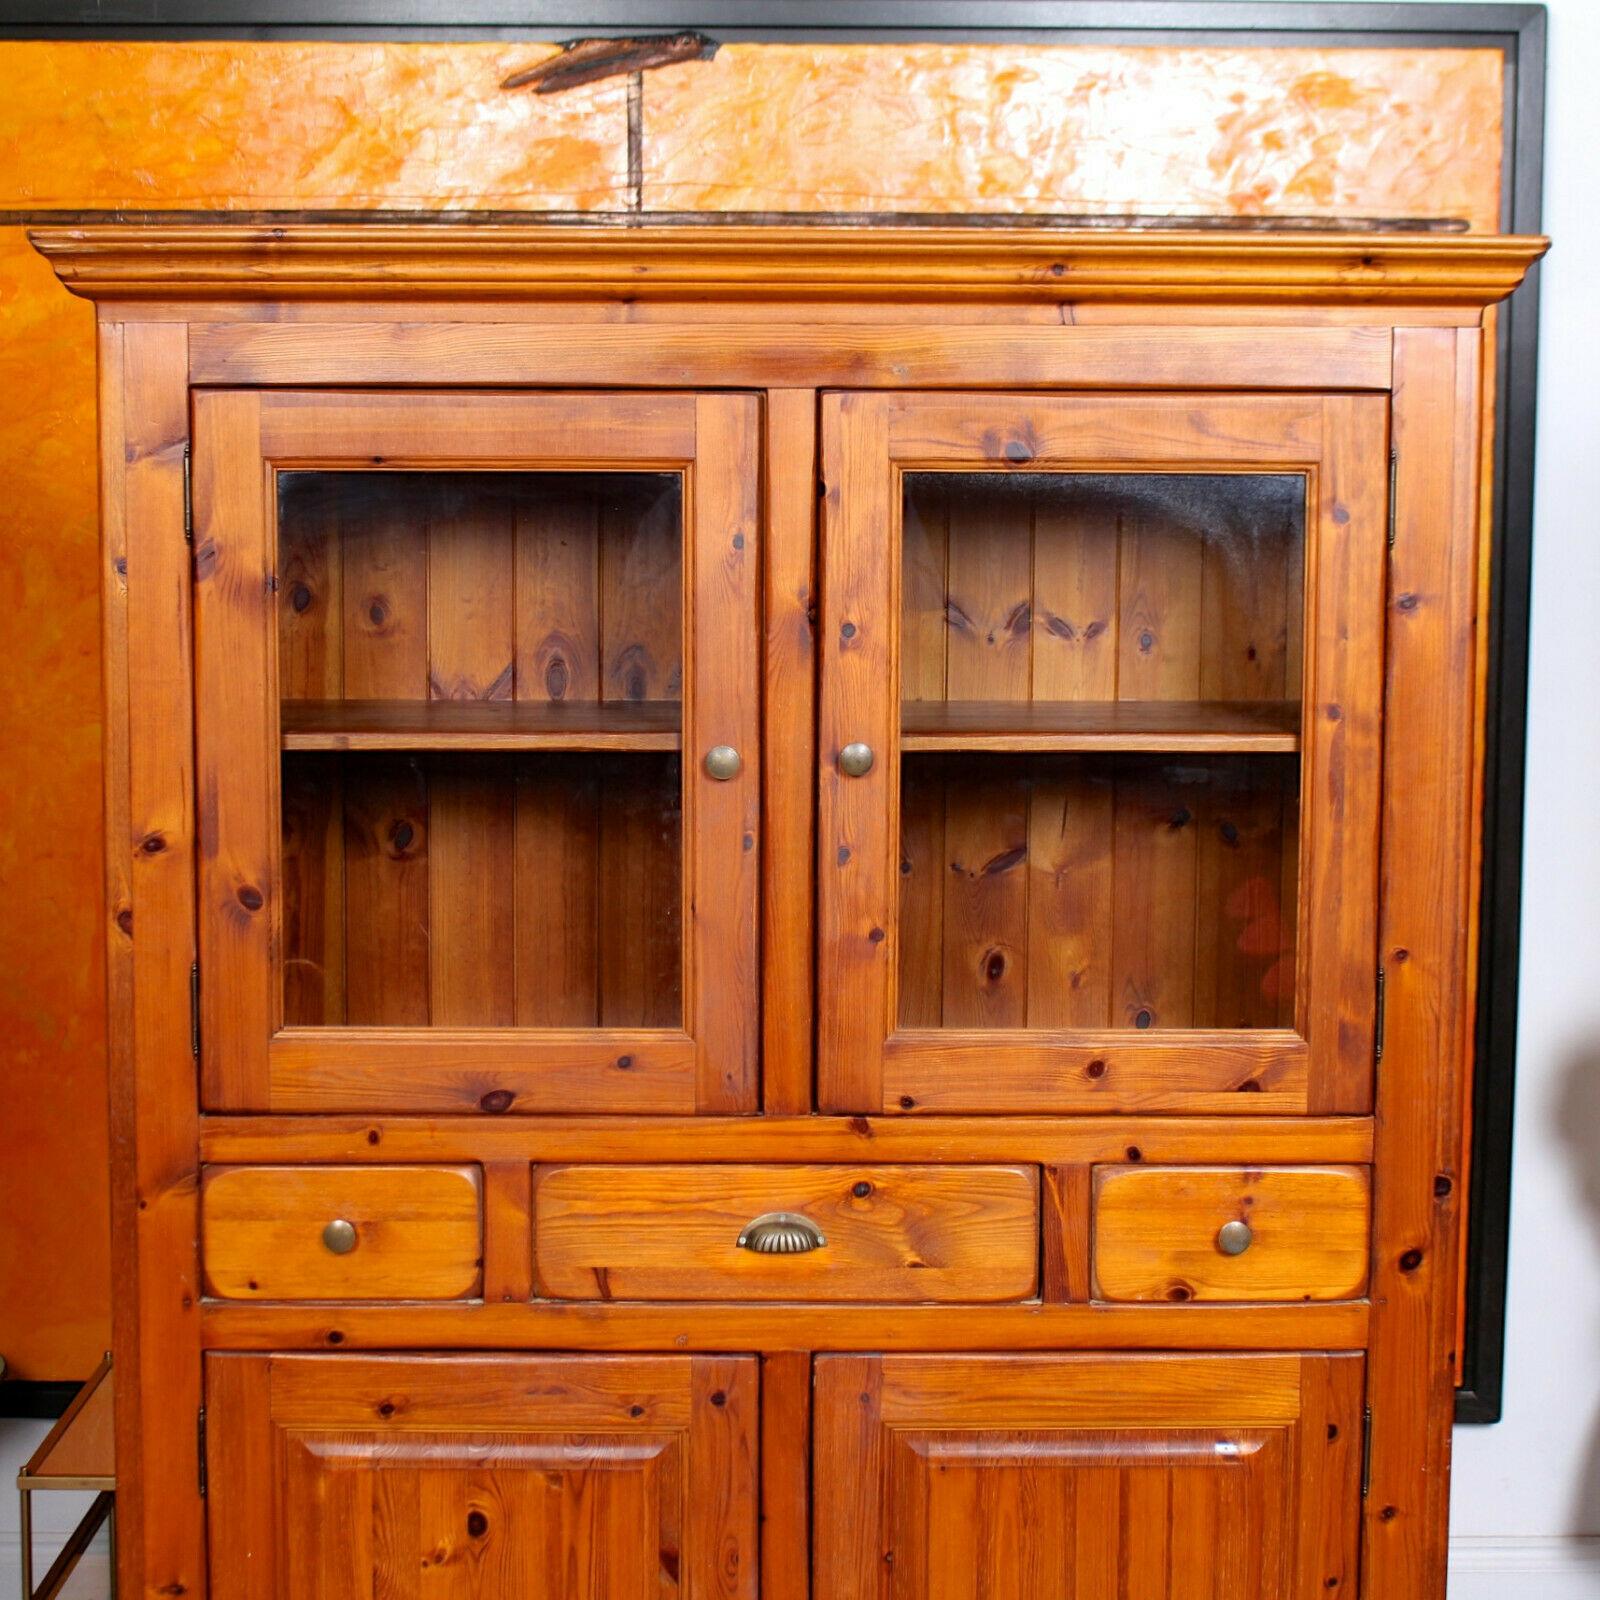 The carved cornice above glazed paneled doors enclosed shelving and fitted drawers with dovetailed jointing and tongue and groove solid interiors. Fitted a pair of paneled doors below enclosed shelving and raised on carved feet.